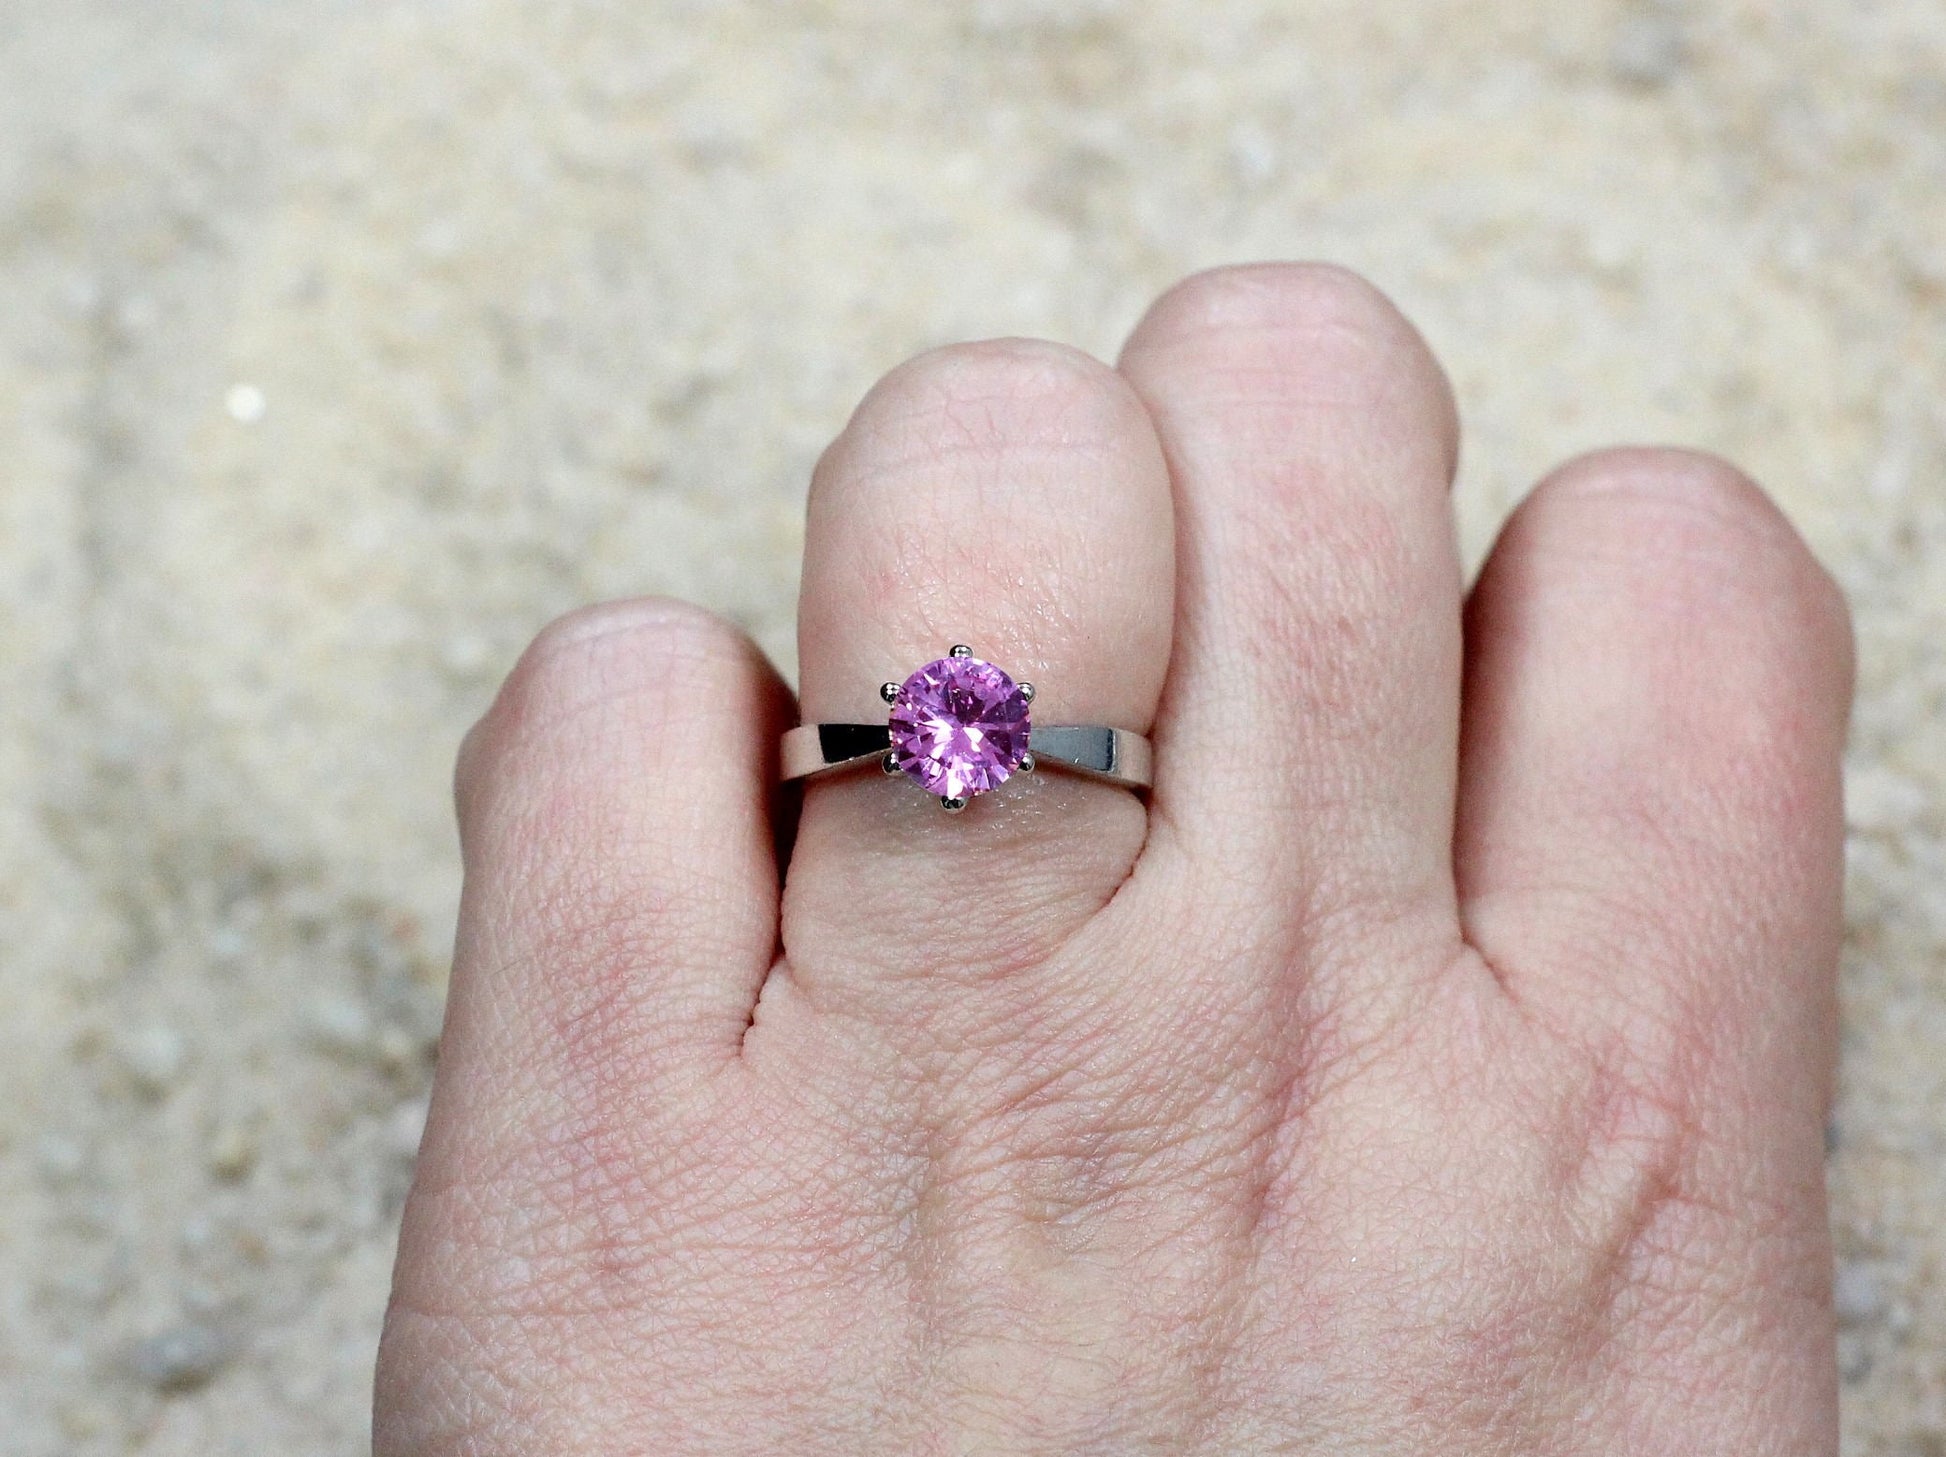 Pink Sapphire Engagement Ring, 6 prong, Solitaire, 1.5ct, 7mm, Promise Ring, Gift for Her, Pink Sapphire Ring BellaMoreDesign.com